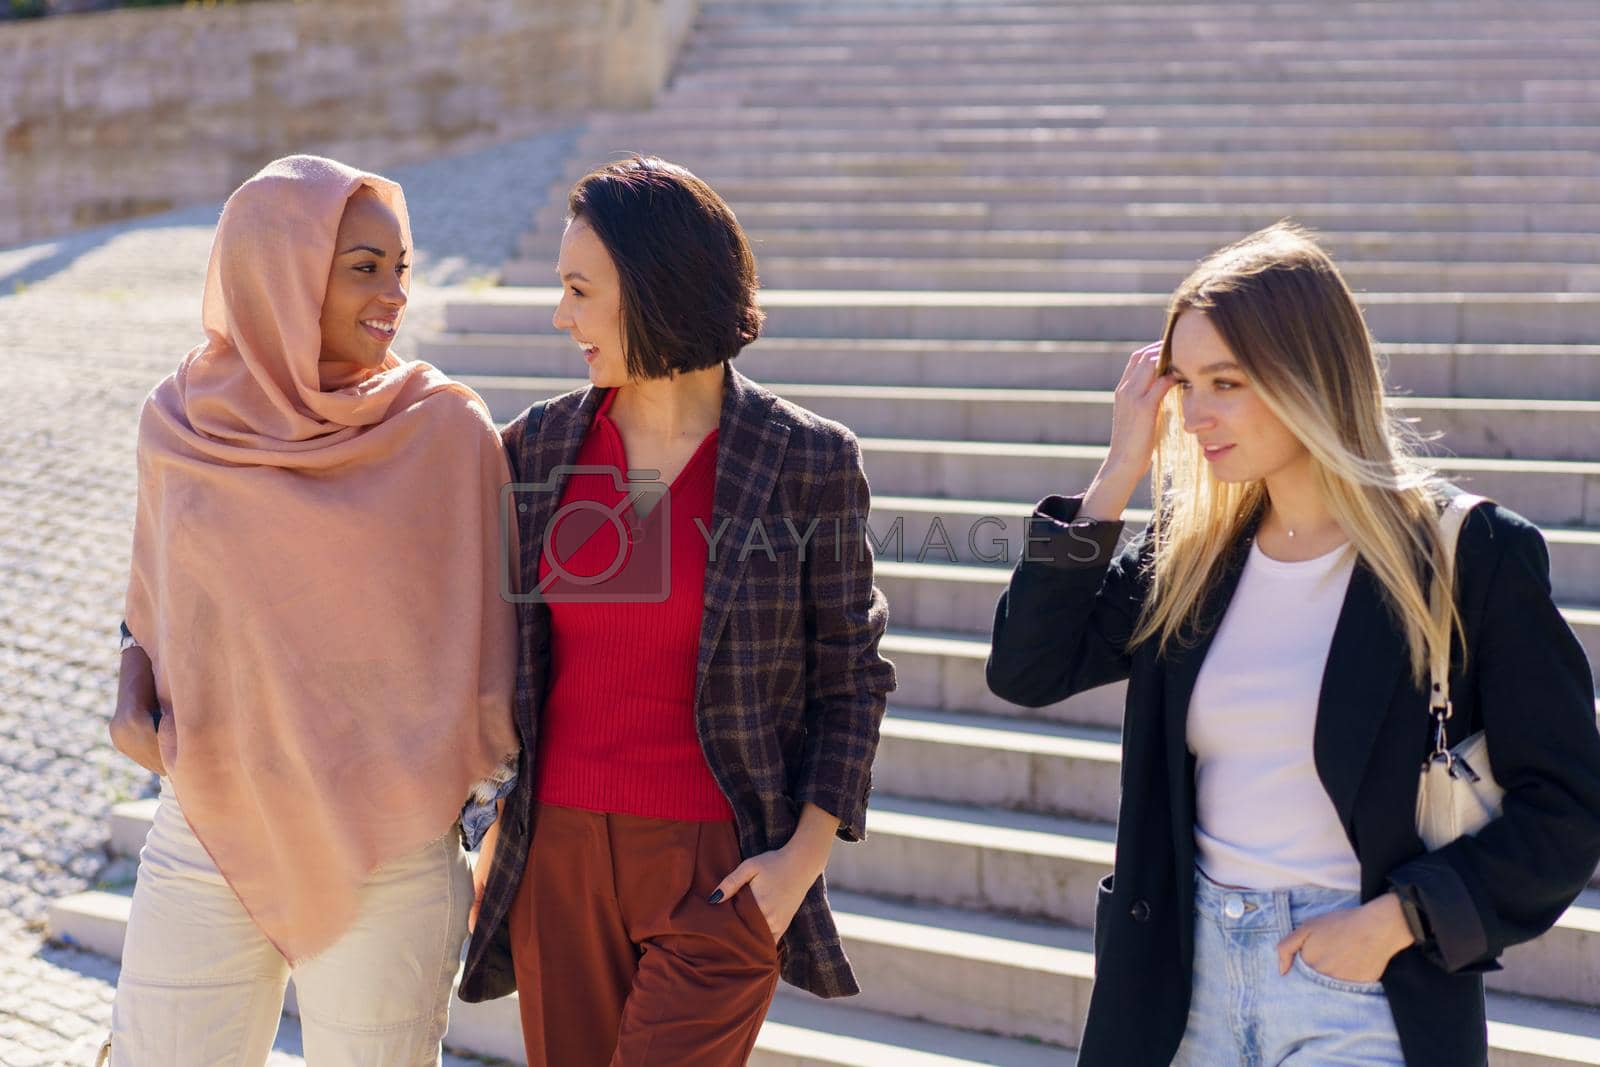 Royalty free image of Positive young diverse female friends walking downstairs in campus by javiindy